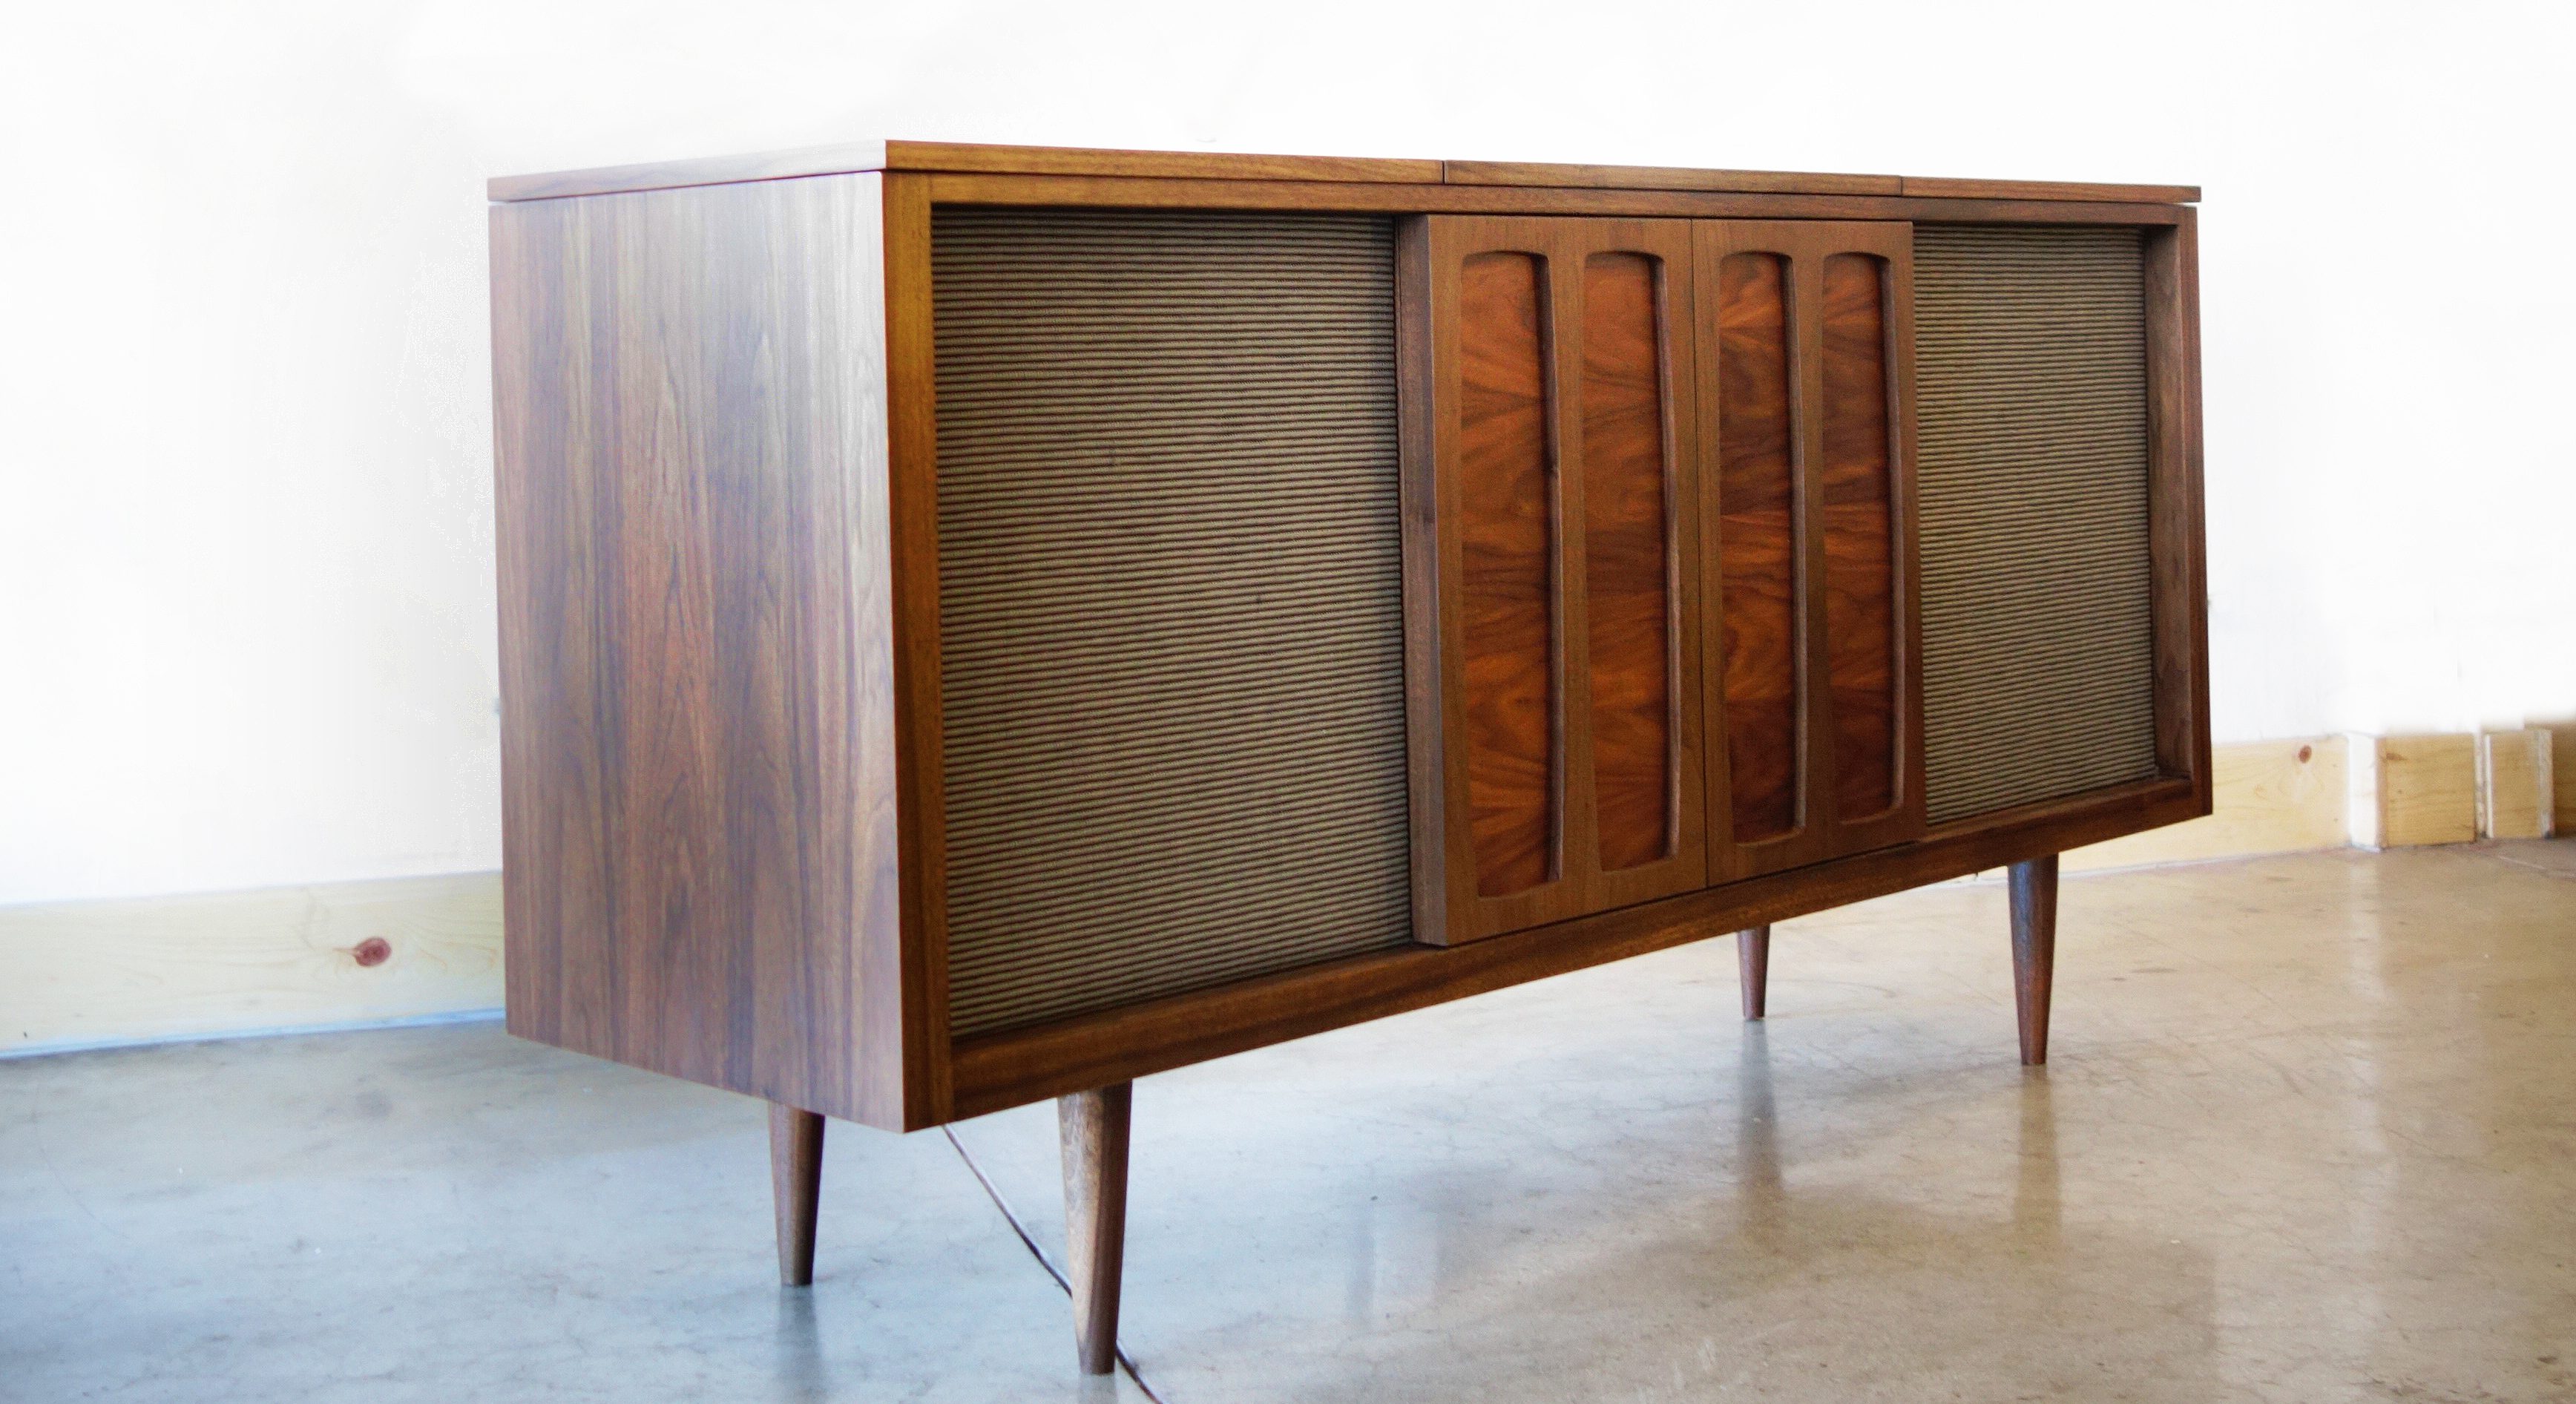 kc27 stereo record console